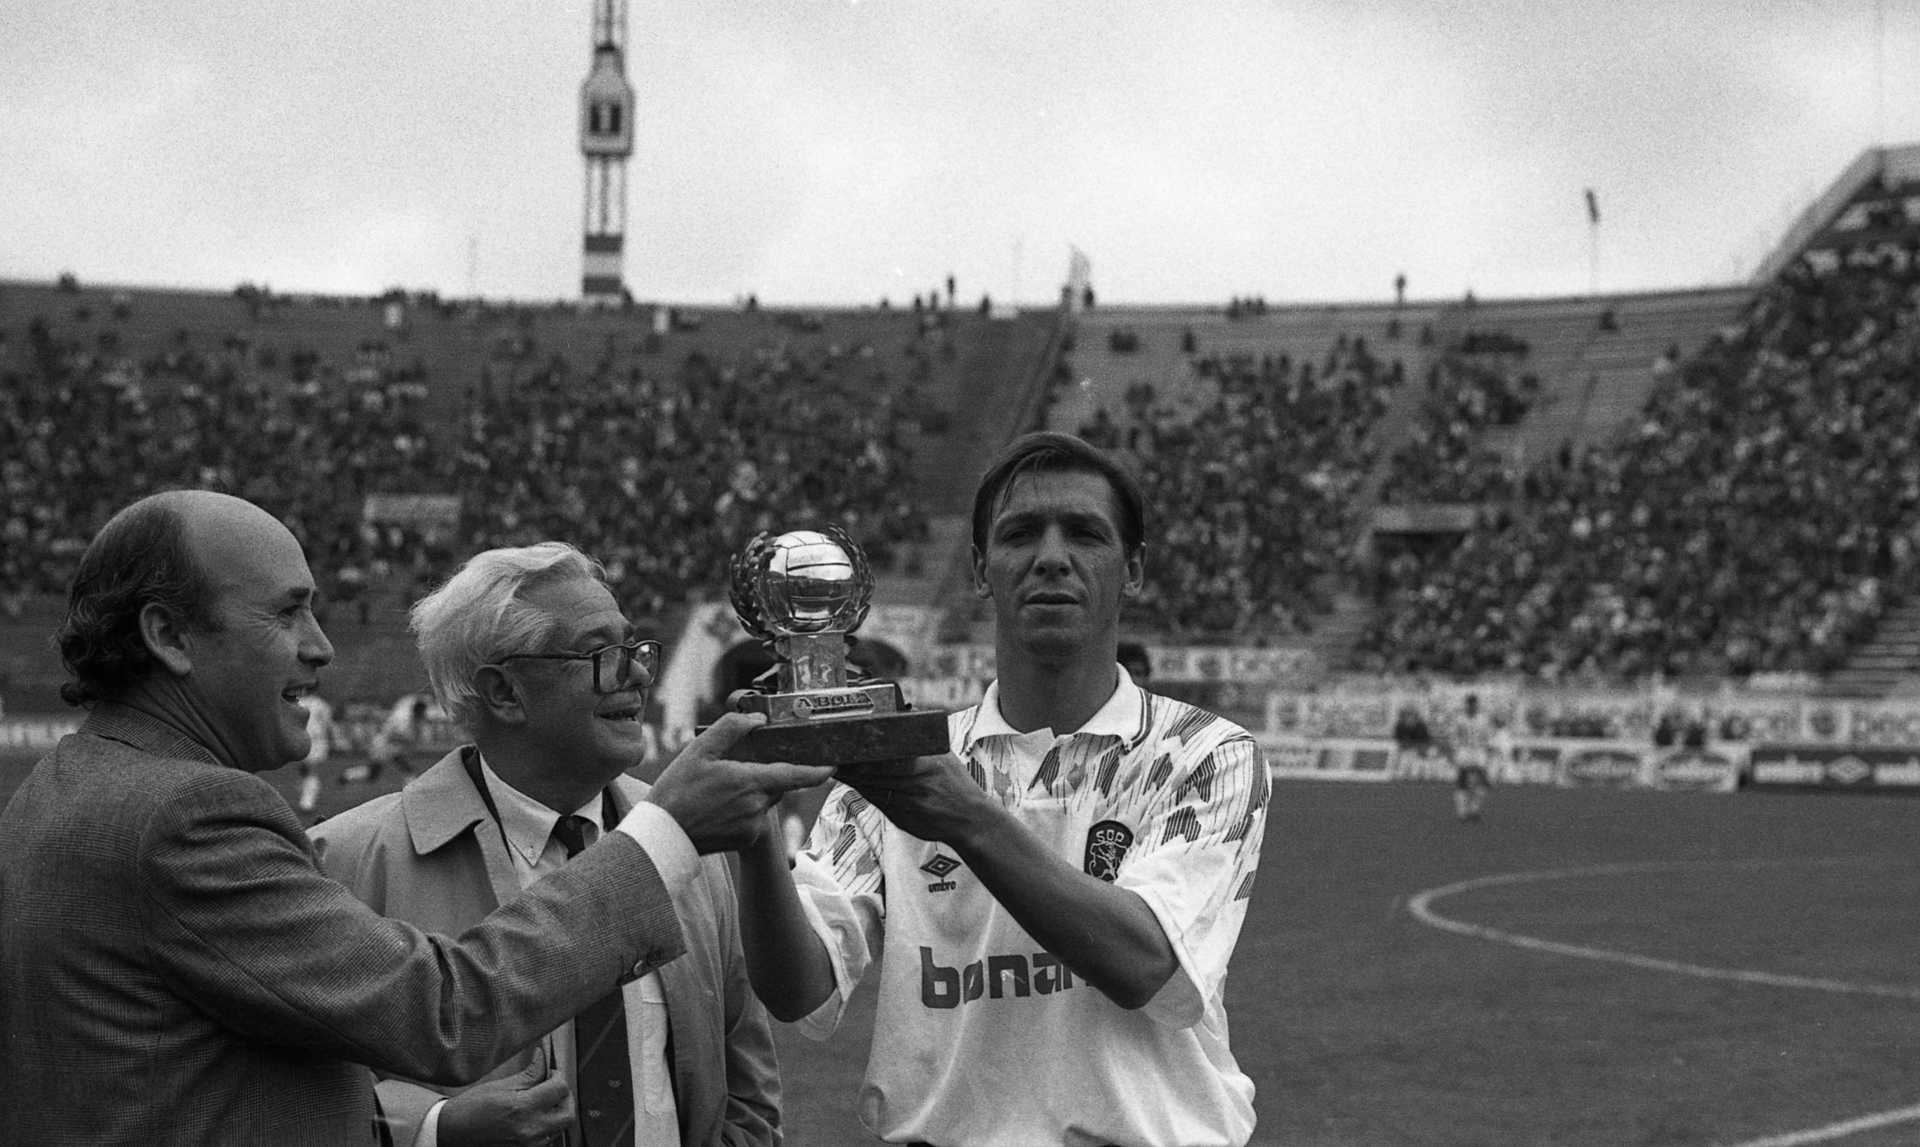 Fernando Gomez receives the Ballon d'Or in 1990 while playing for Sporting.